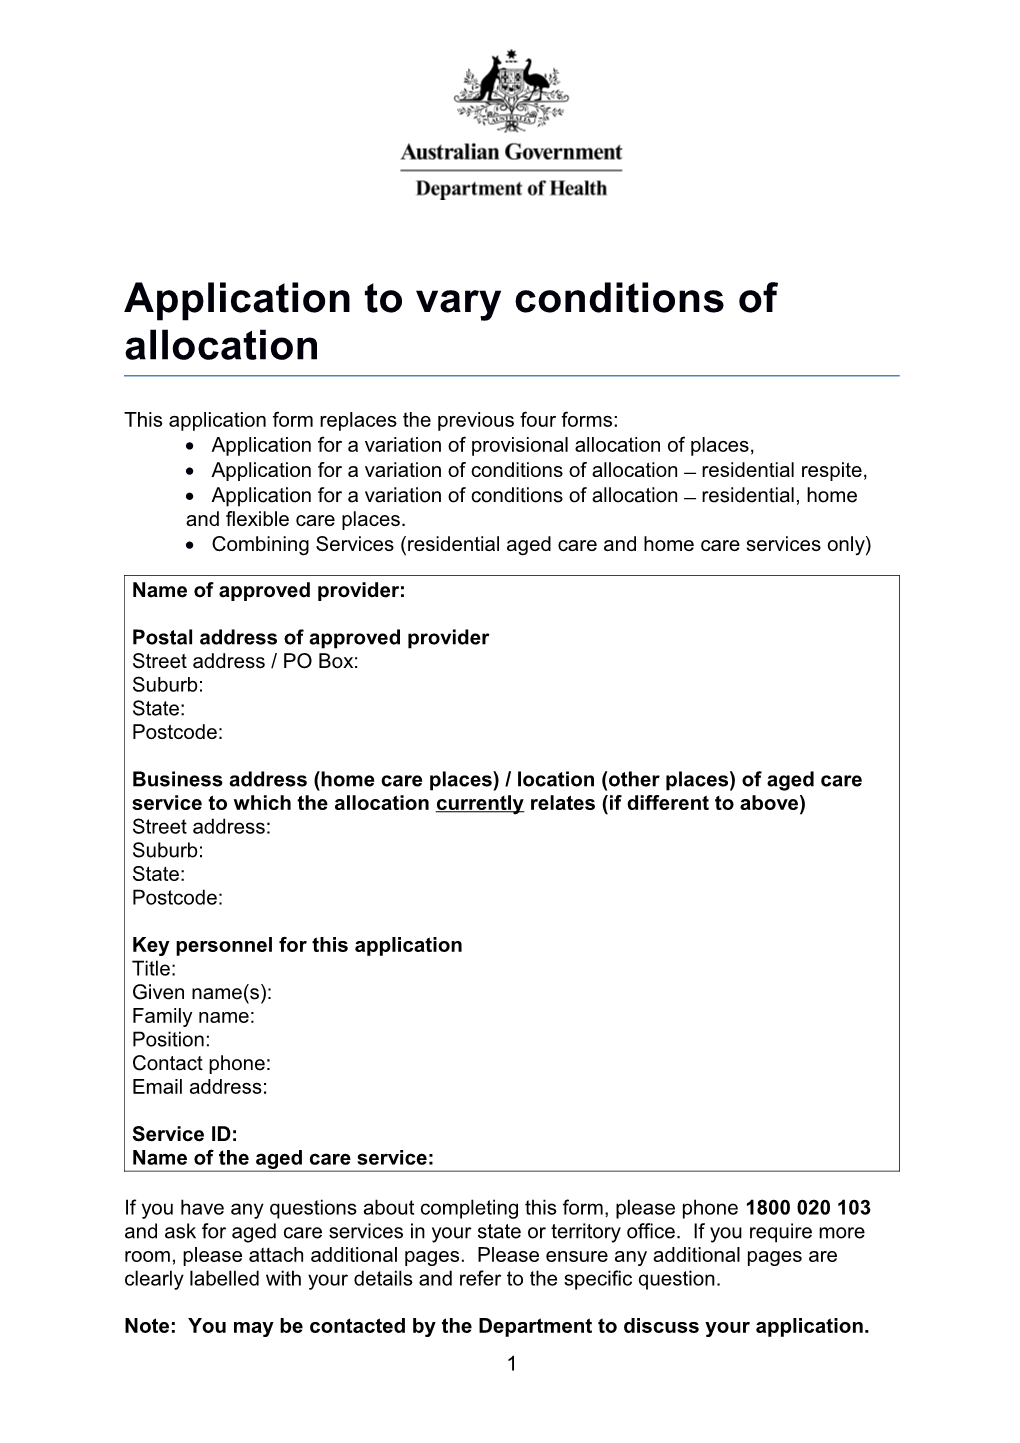 Application to Vary Conditions of Allocation